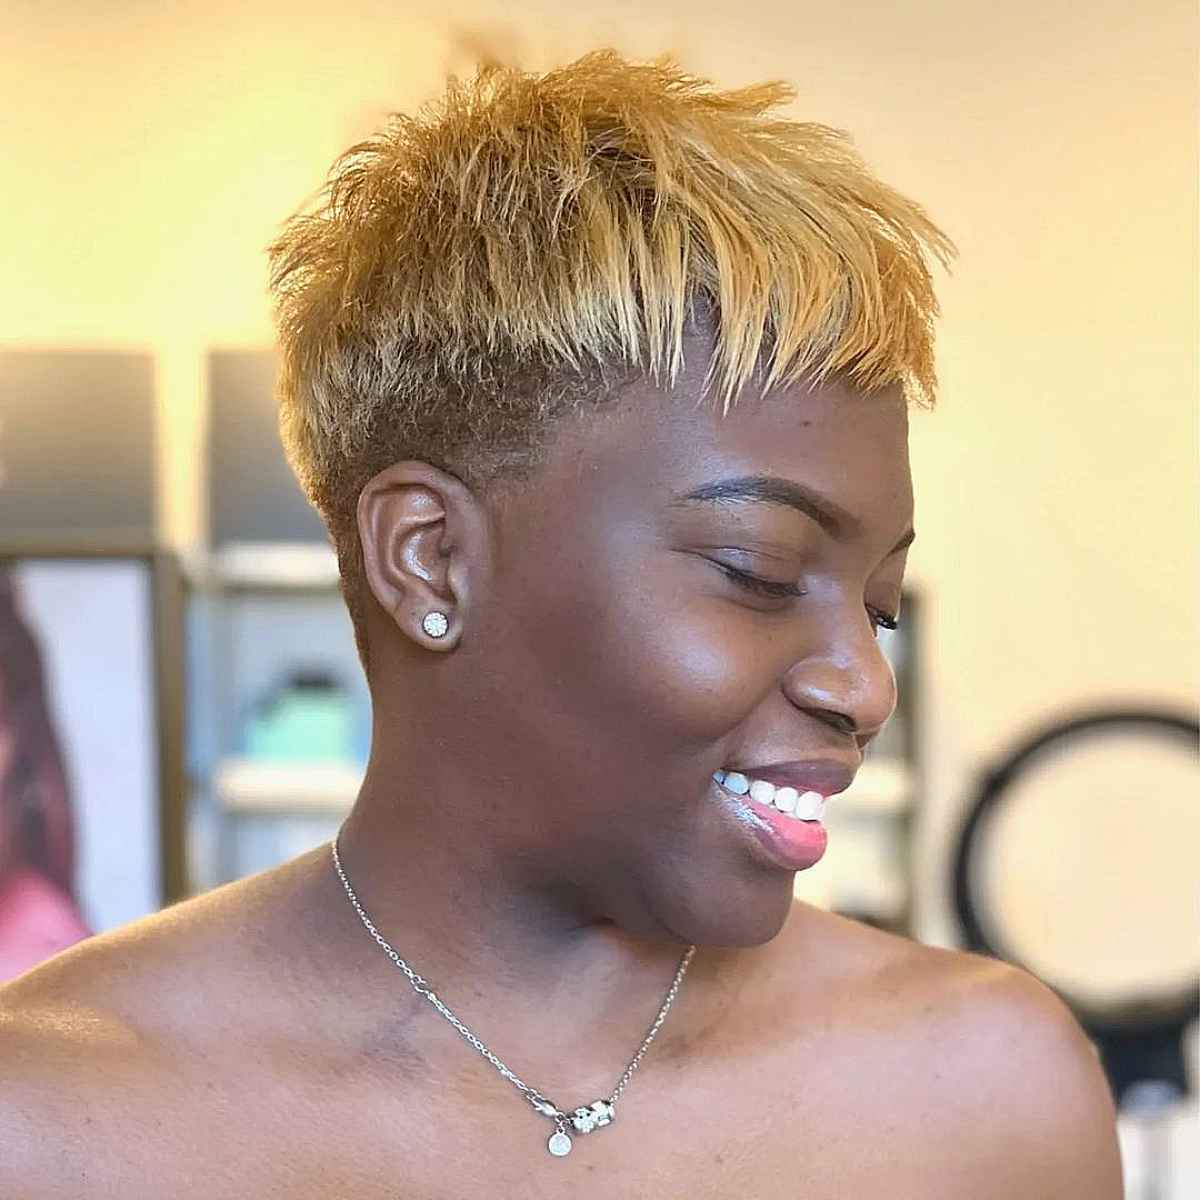 Textured Golden Blonde Pixie Style with Bangs for Black Women